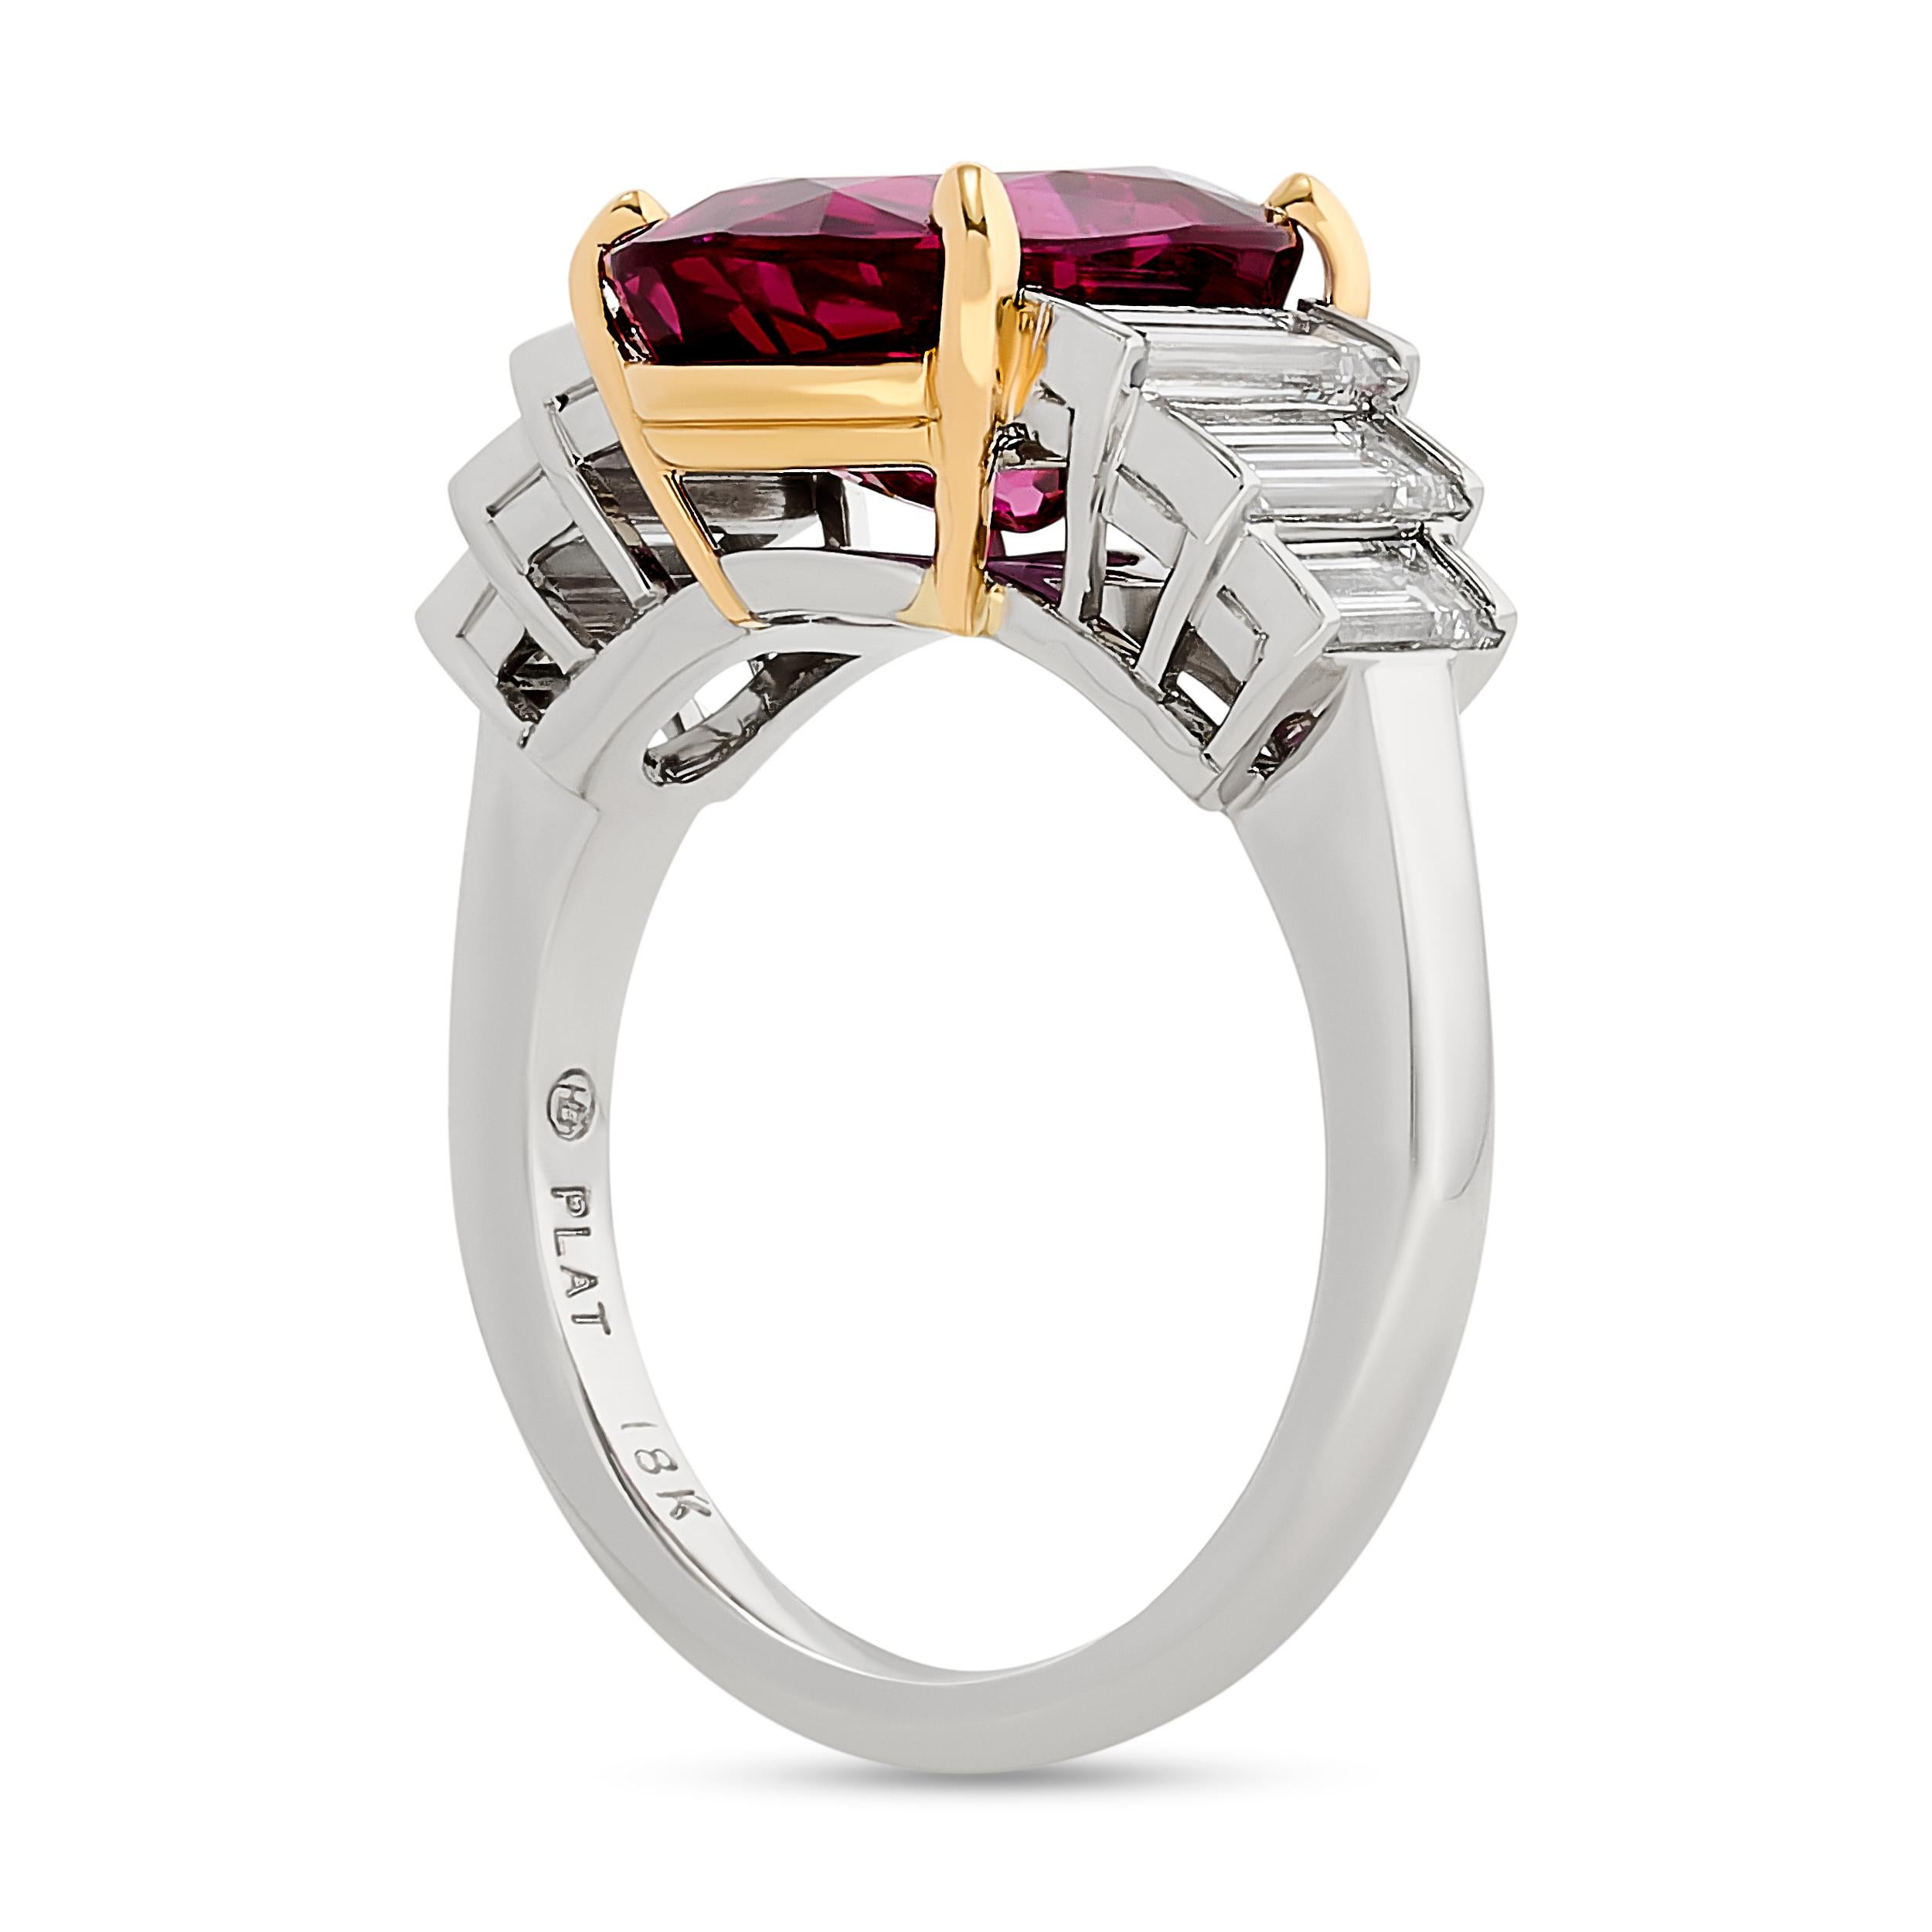 This Oscar Heyman ruby and diamond ring is a masterpiece of craftsmanship and luxury - blend of bright rubies and brilliant diamonds.

This ring features one GIA certified 4.84 carat cushion Thai headed ruby and 6 baguette diamonds totaling